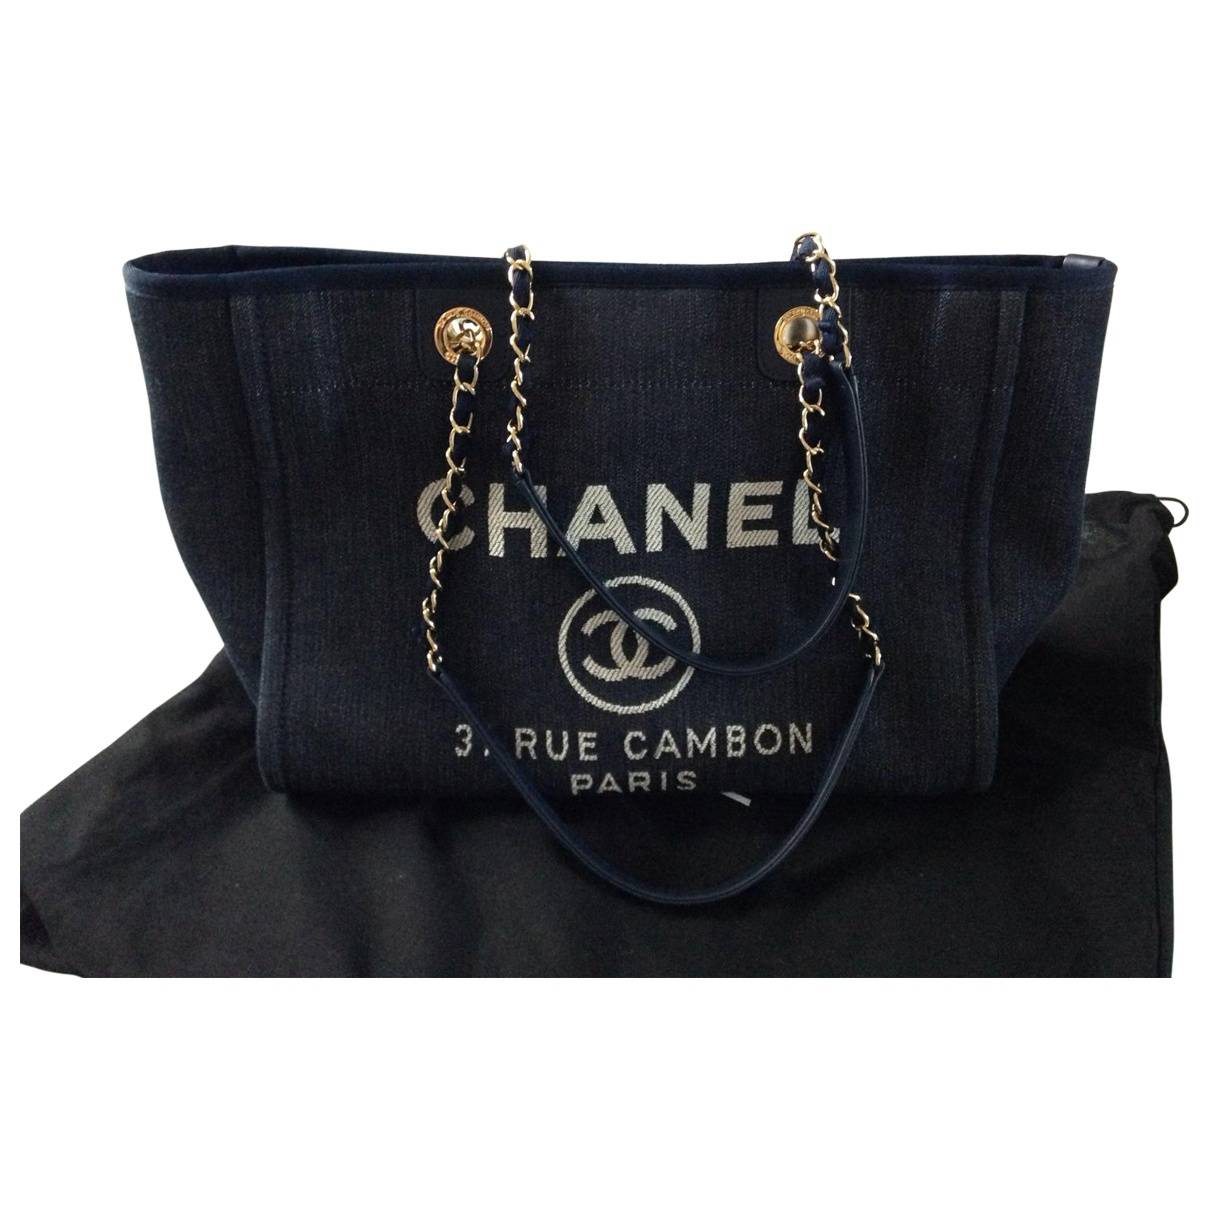 Chanel 31 Rue Cambon - 32 For Sale on 1stDibs  chanel 31 rue cambon bag, chanel  rue cambon bag price, 31 rue cambon chanel bag price